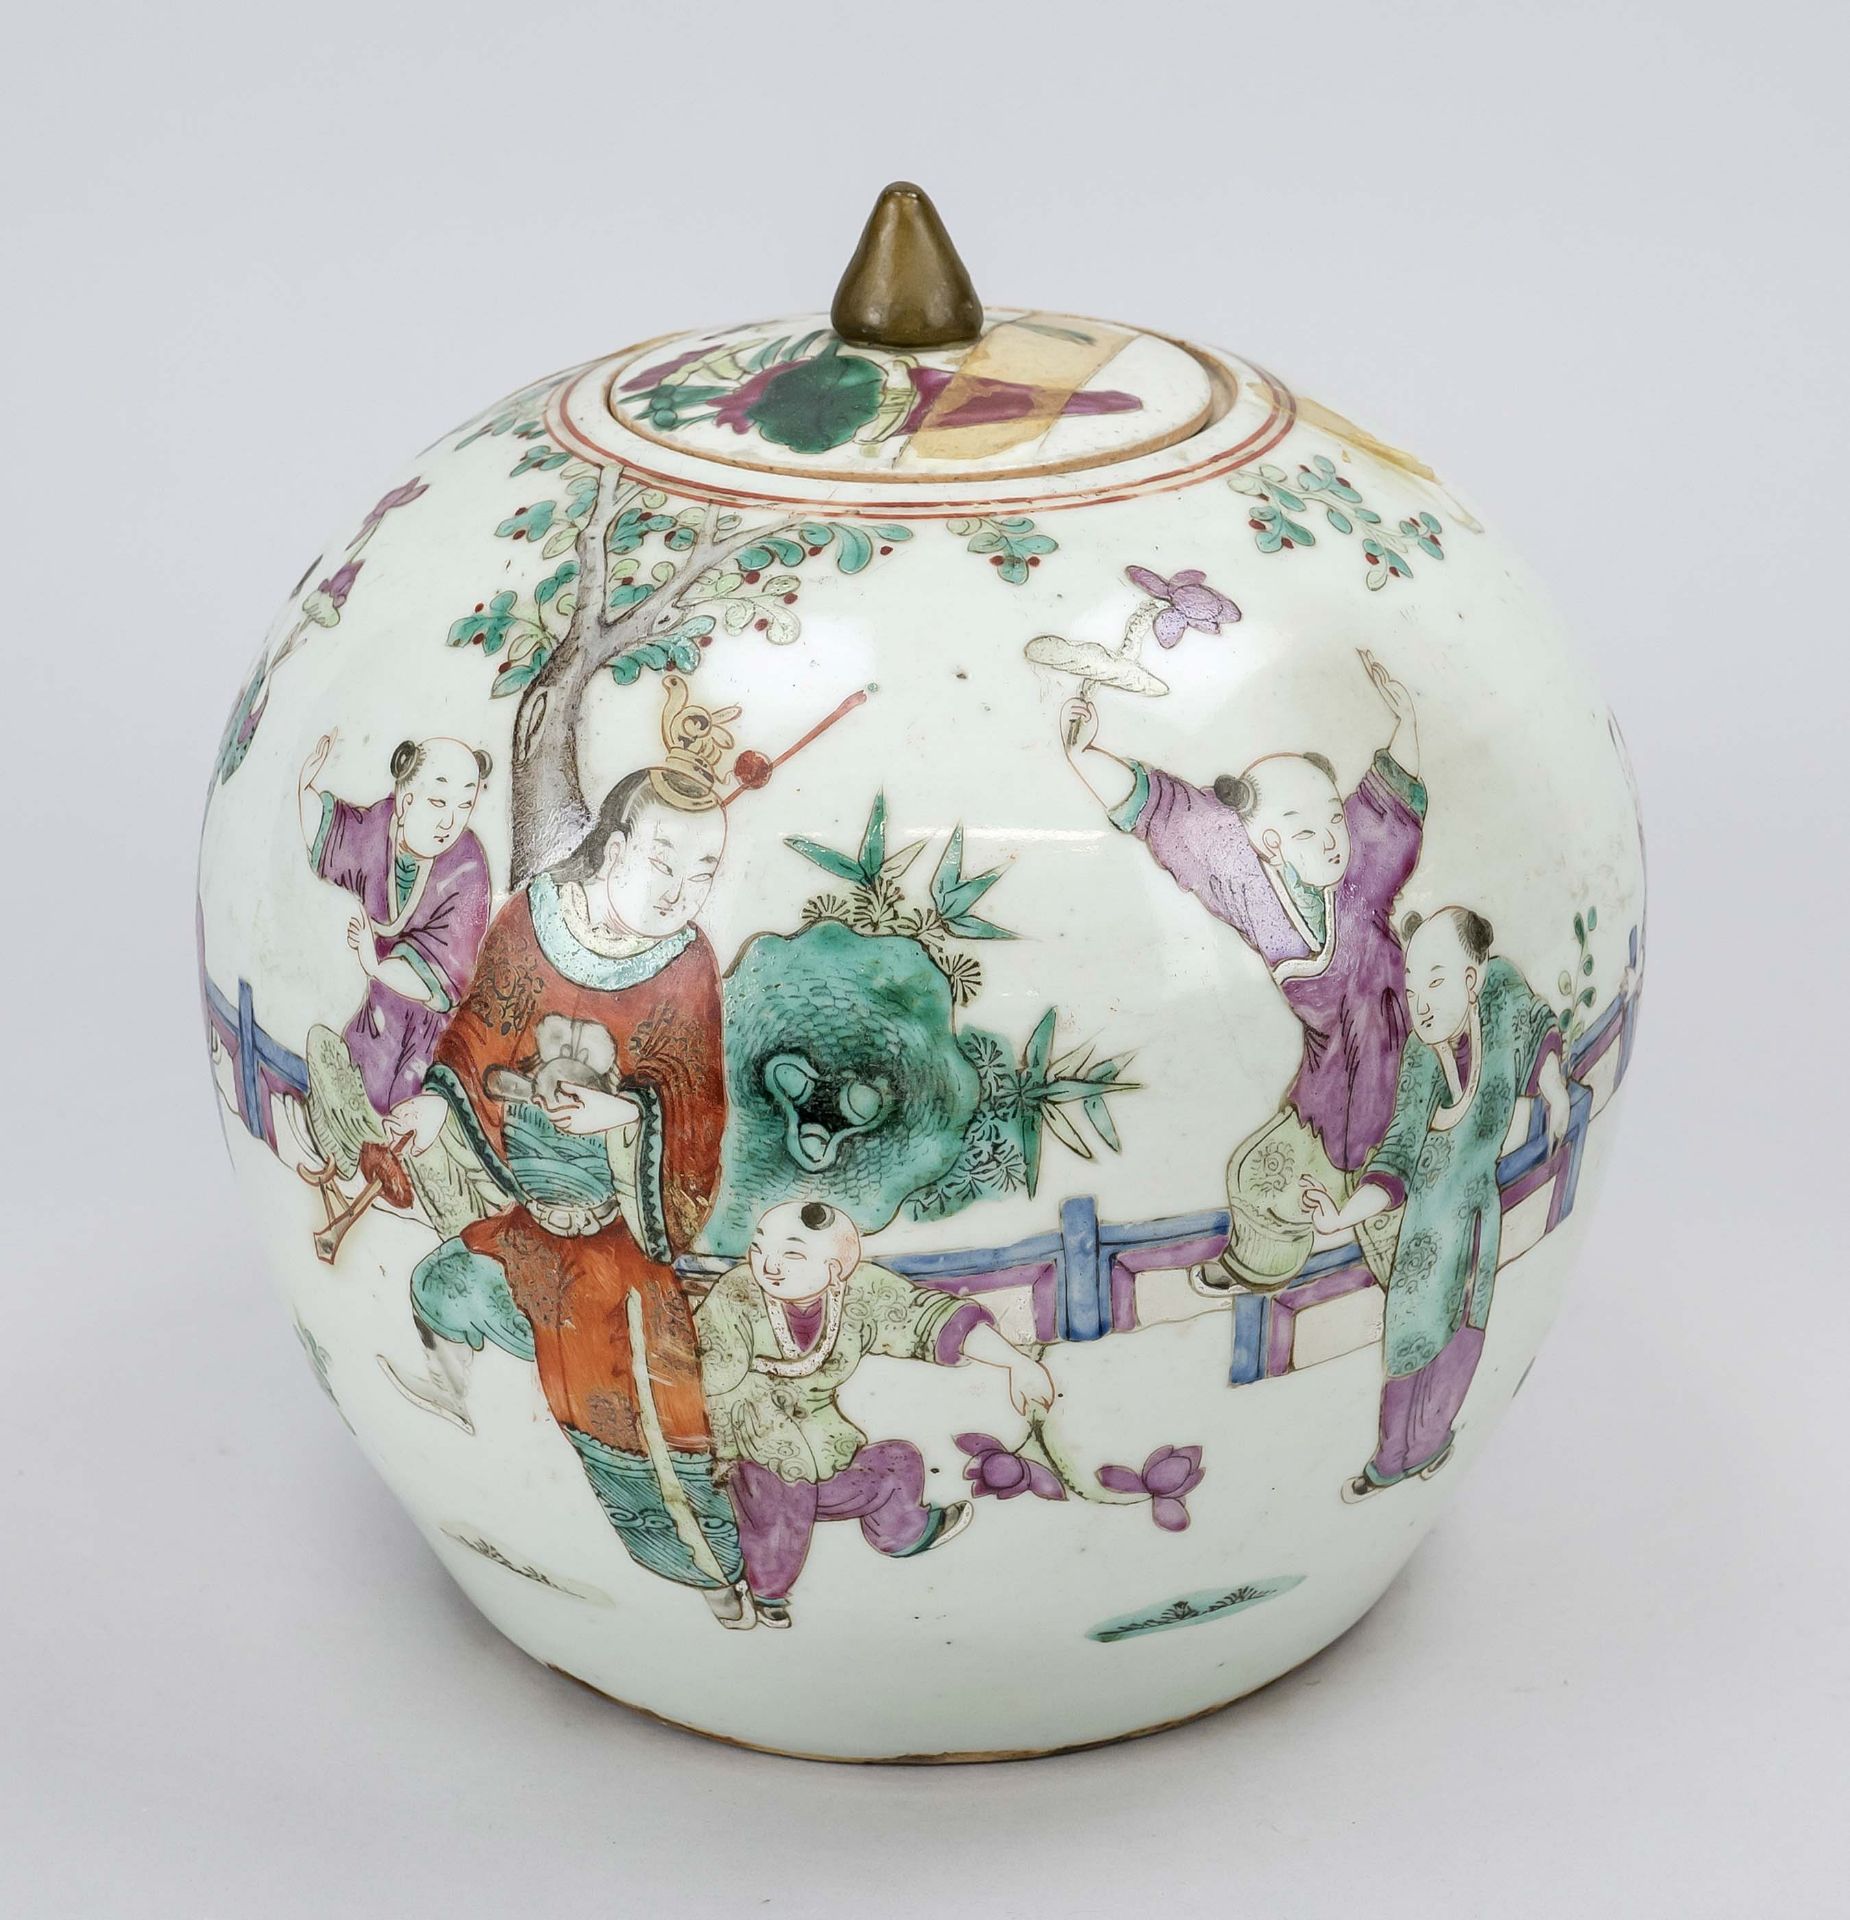 Famille Rose lidded pot, China, 19th century (Qing). Revolving decoration with children/boys playing